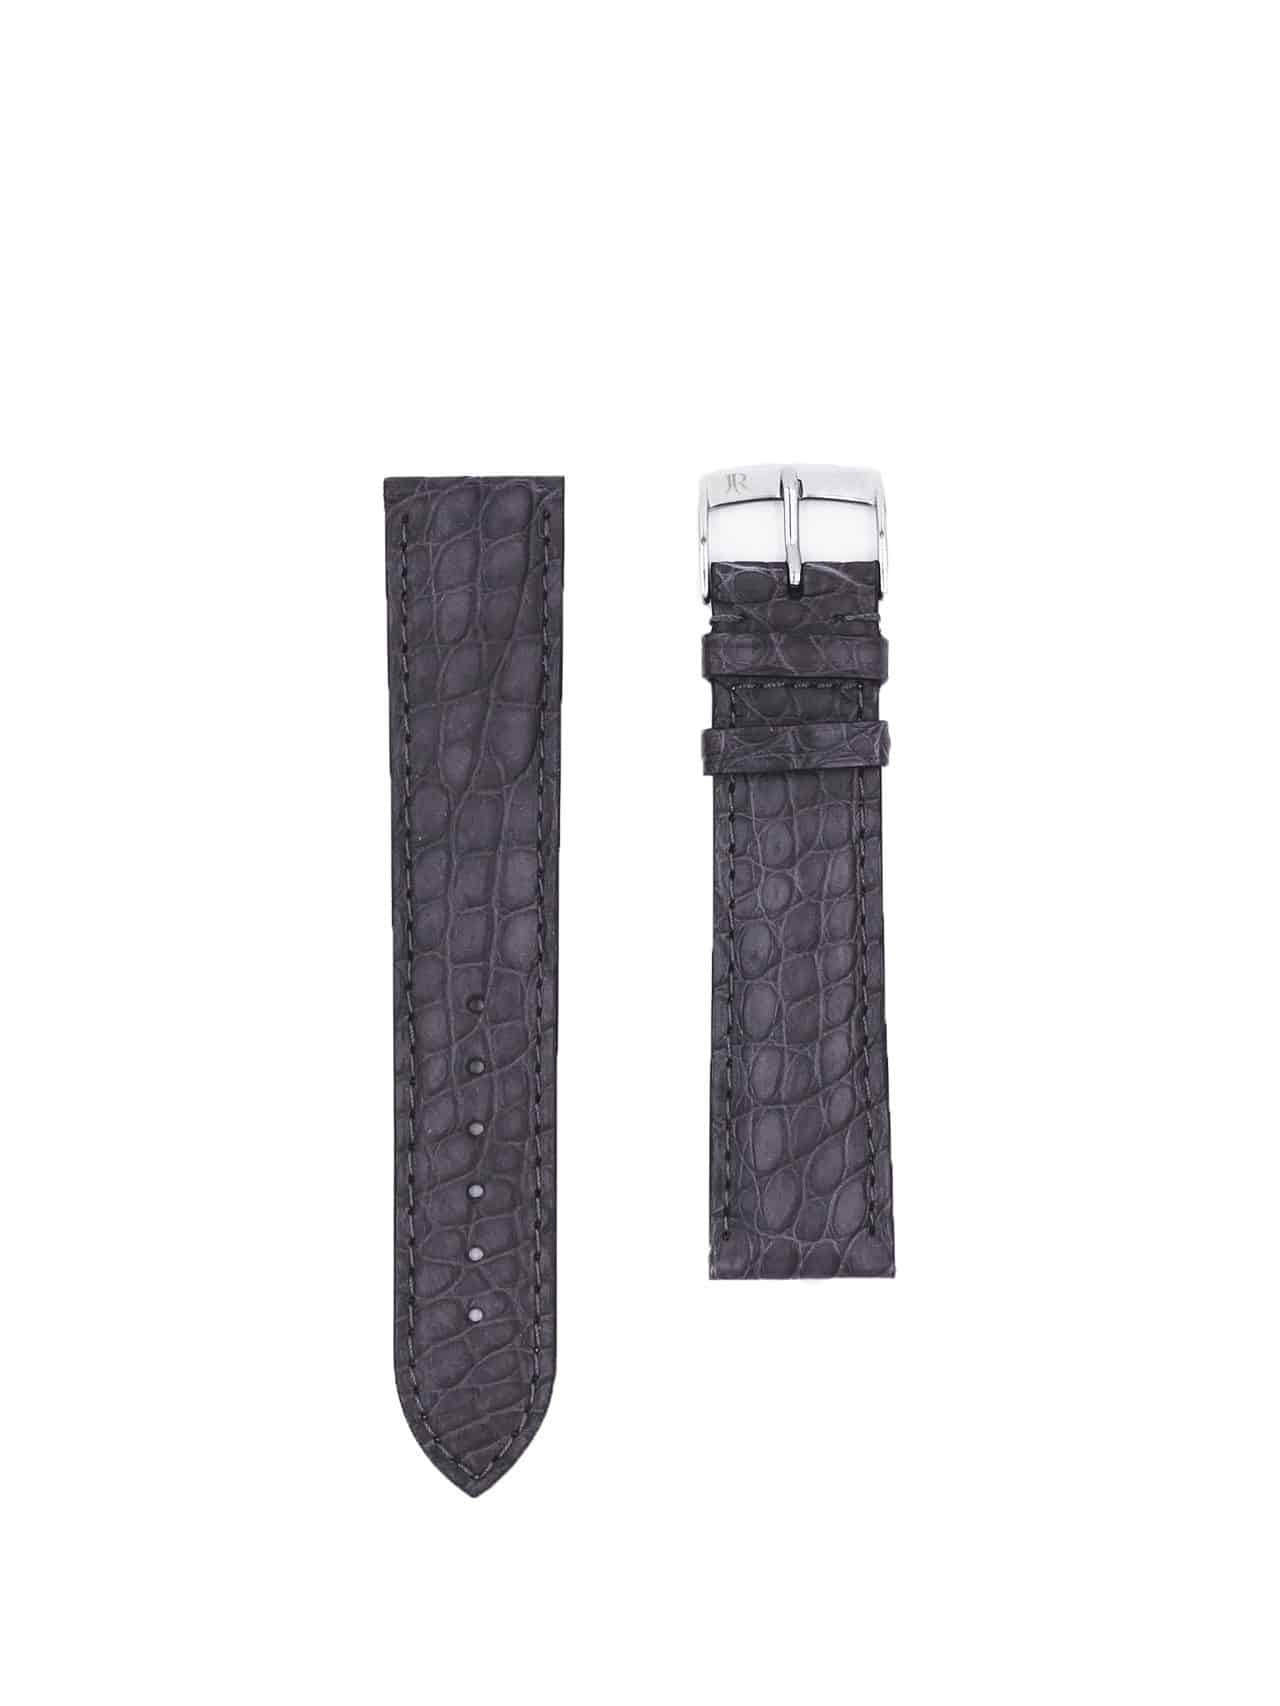 Watch strap leather 20mm